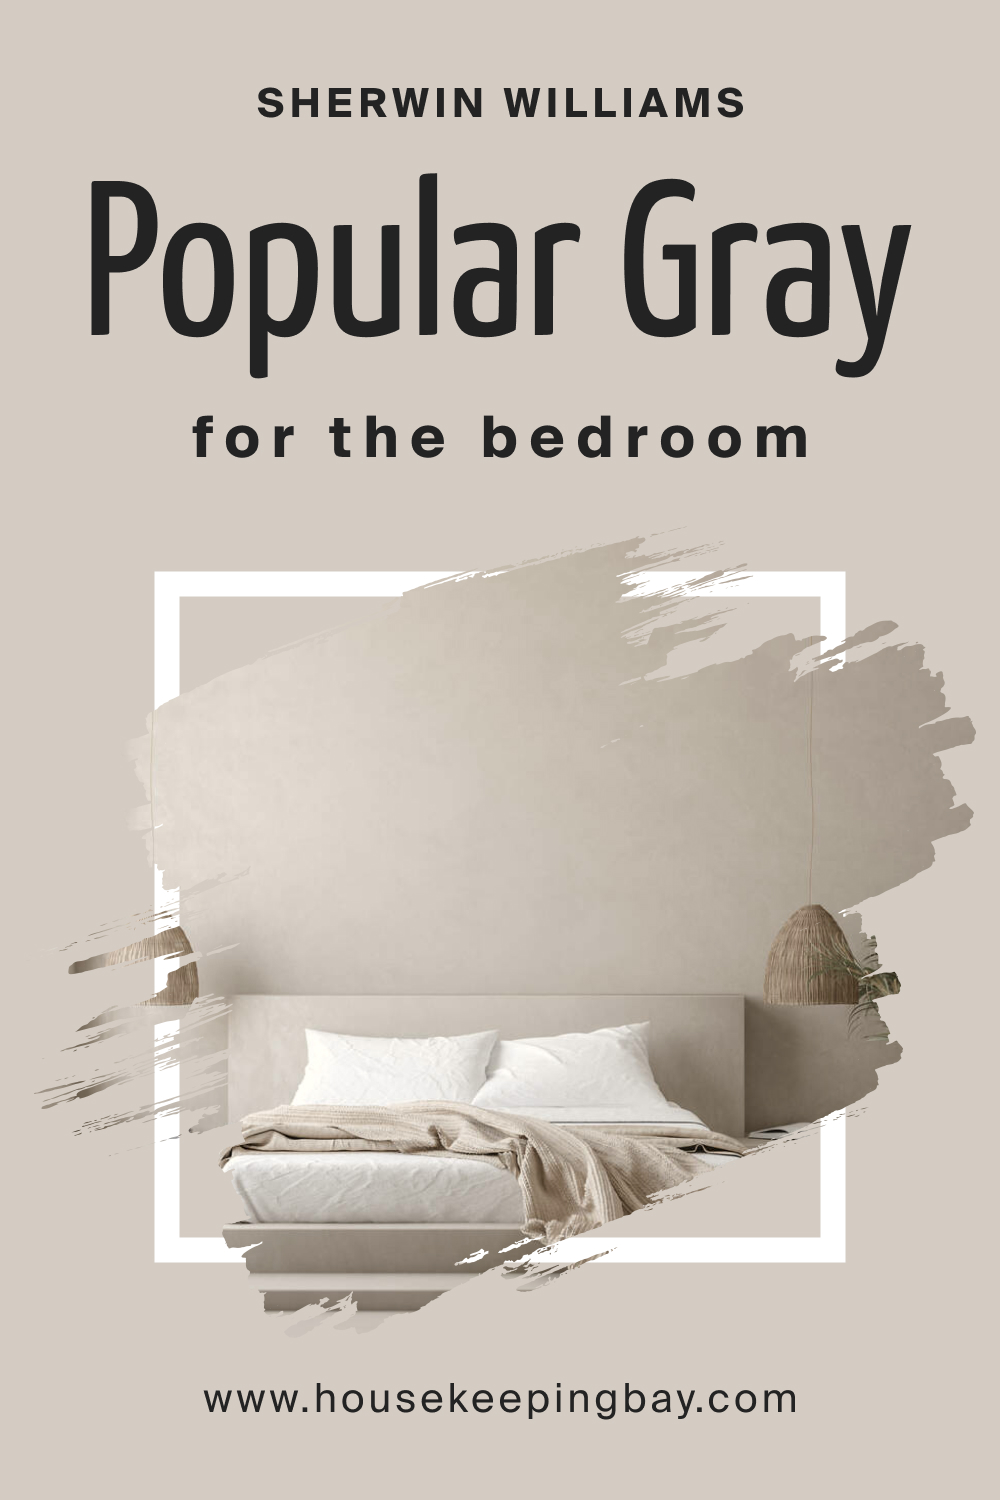 Sherwin Williams. Popular Gray SW For the bedroom